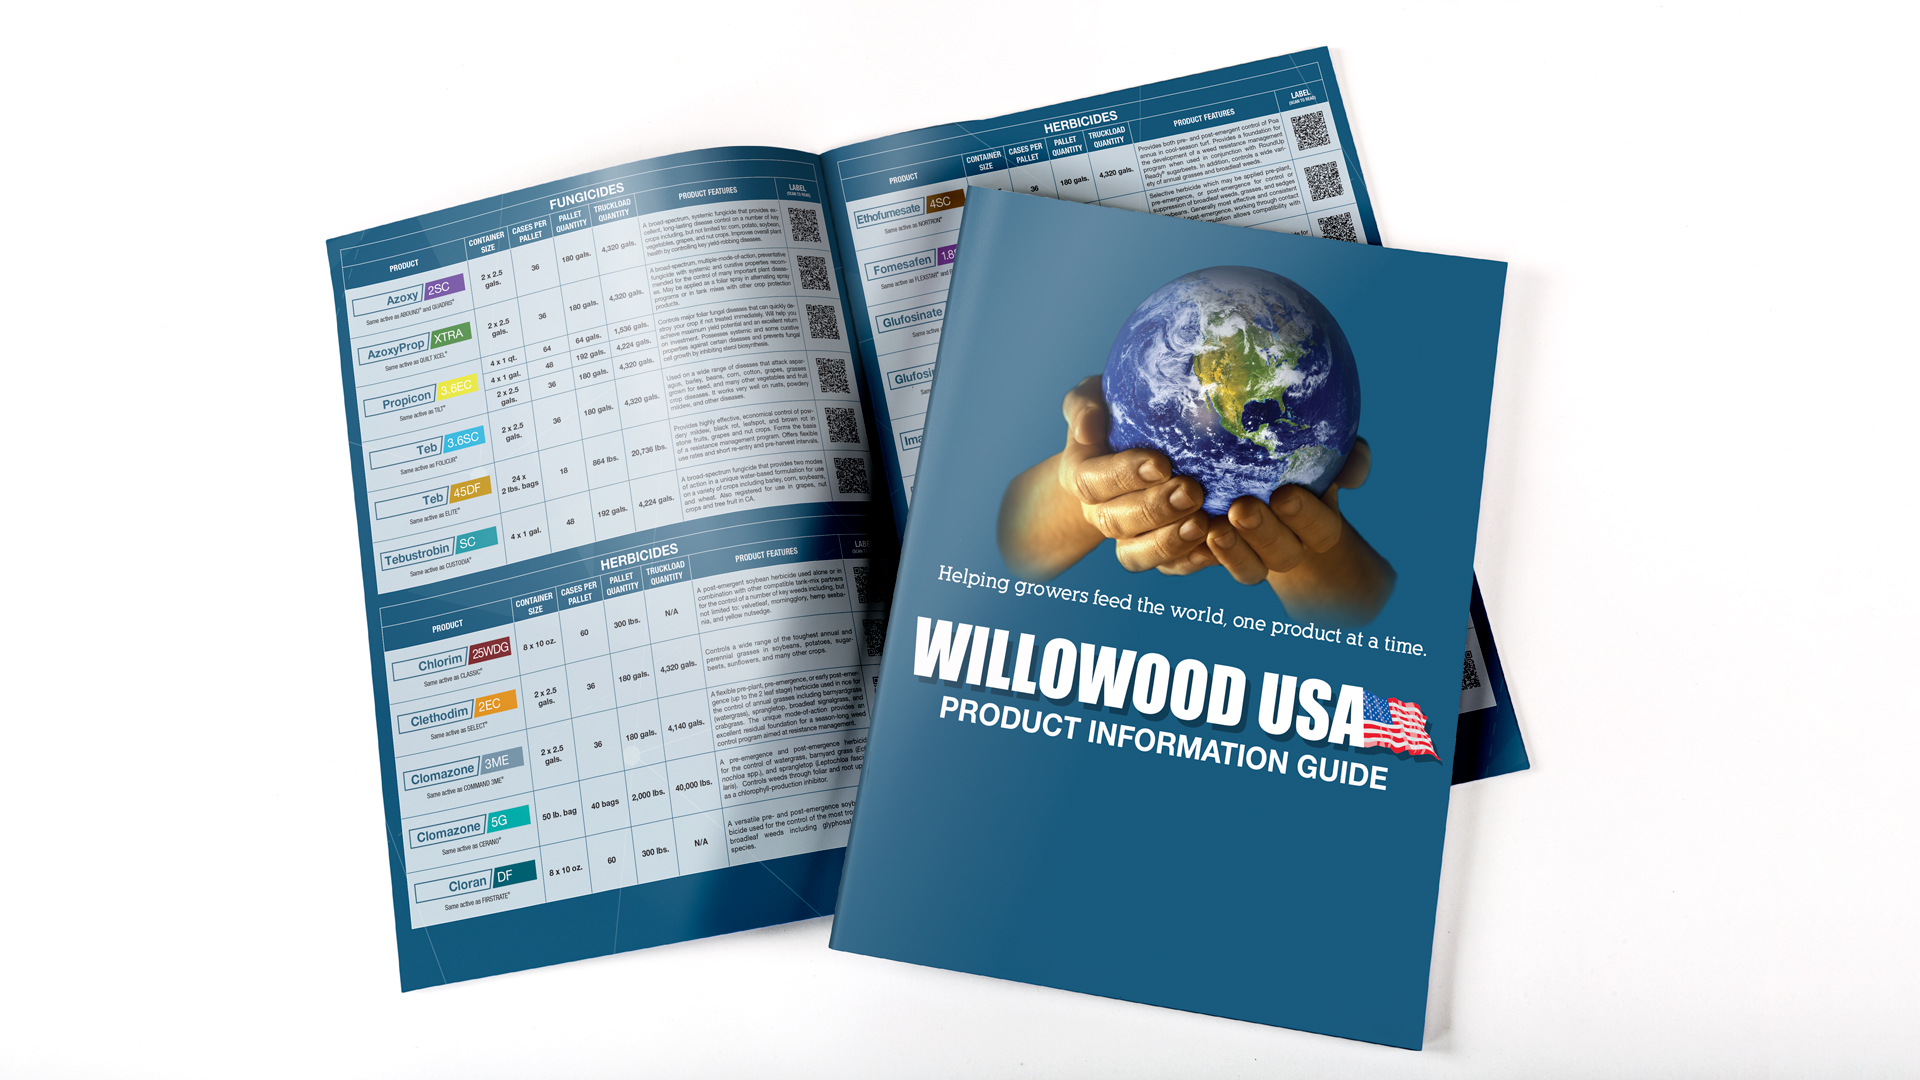 Willowood USA Product Information Guide